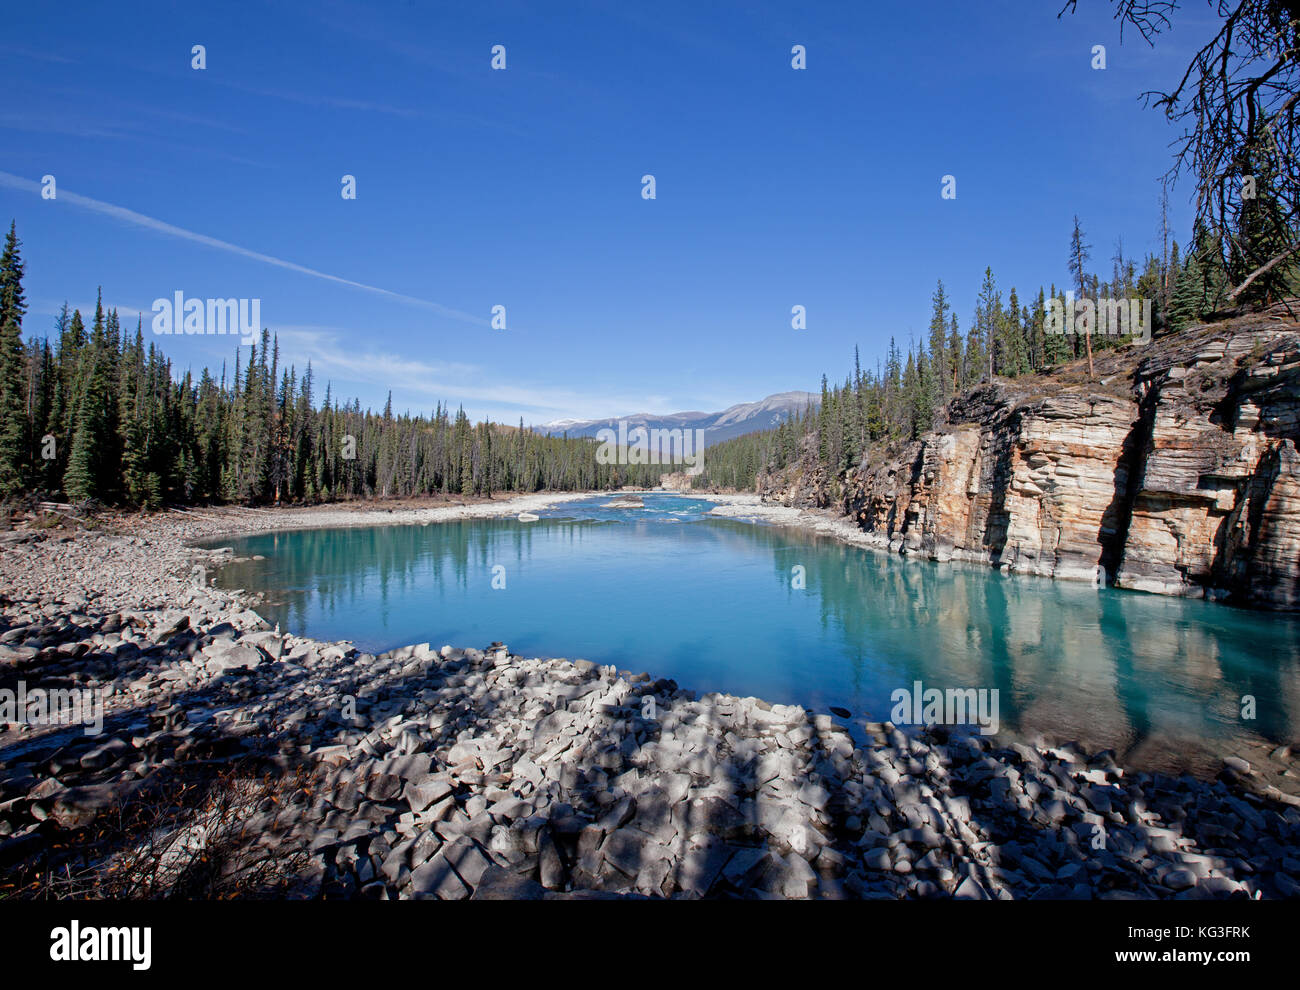 a calm turquoise lake through the Athabasca River in Jasper Park, Alberta Stock Photo